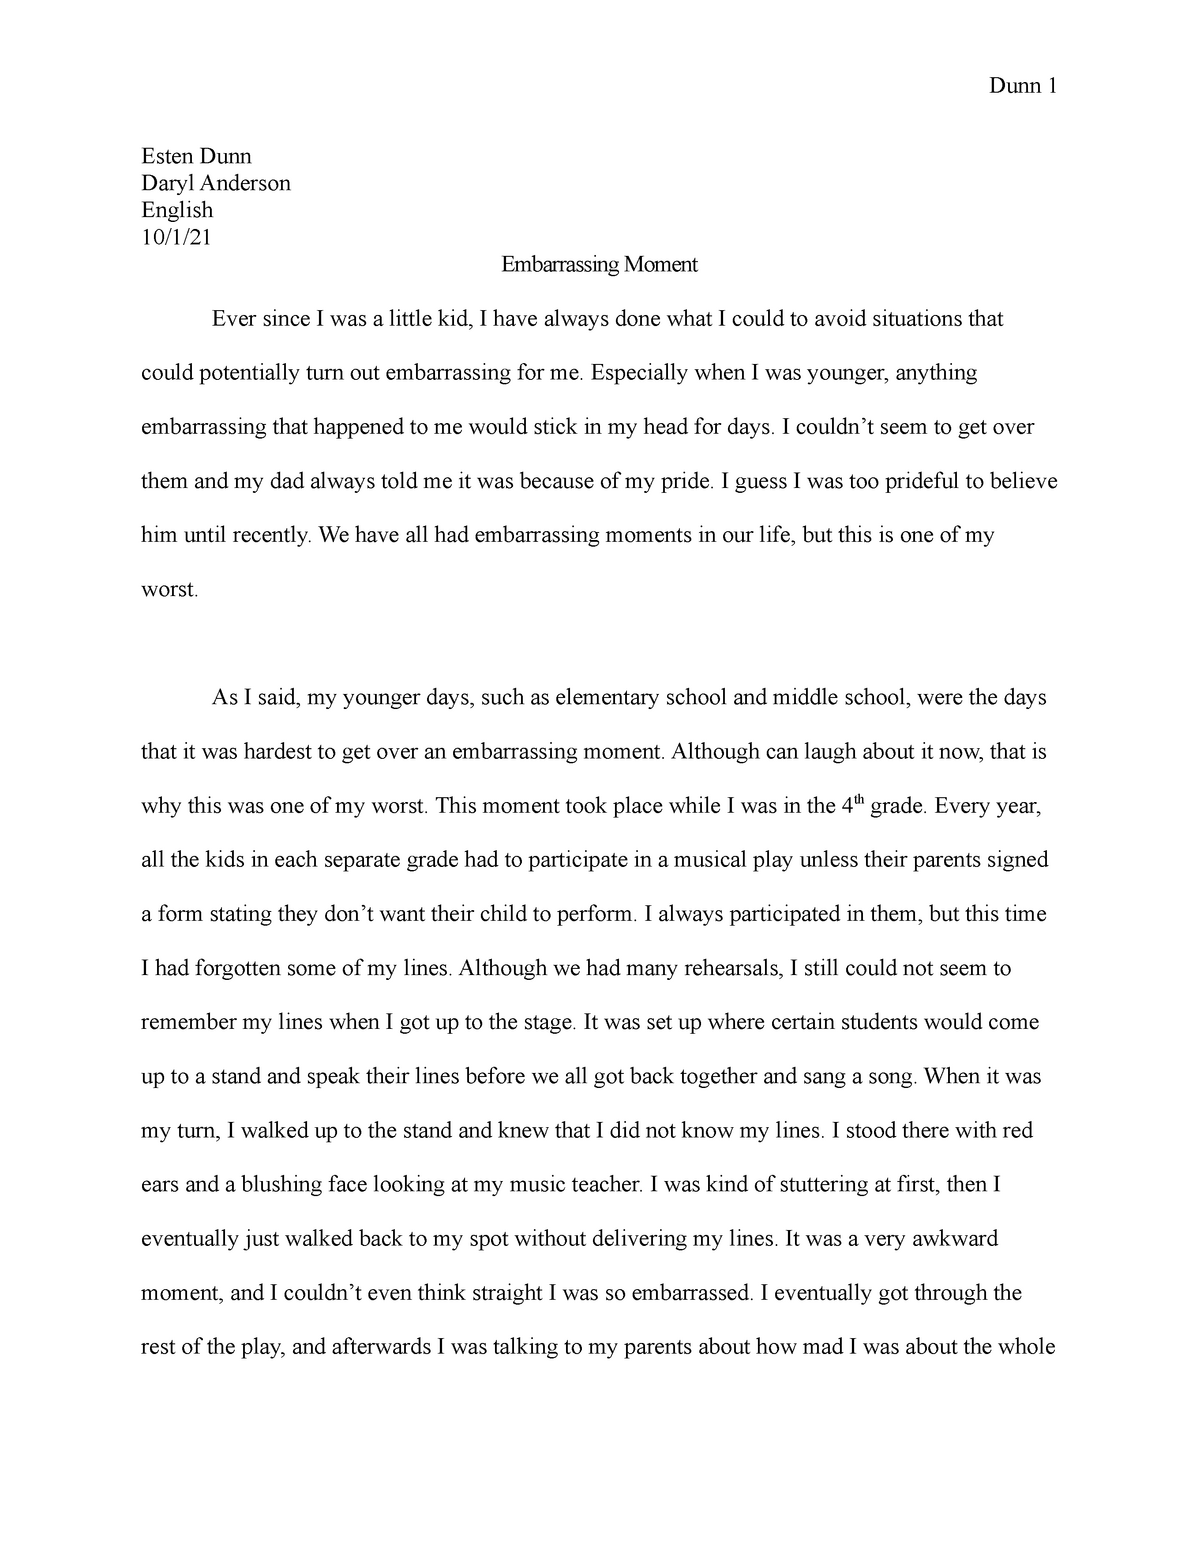 my most embarrassing moment ever essay